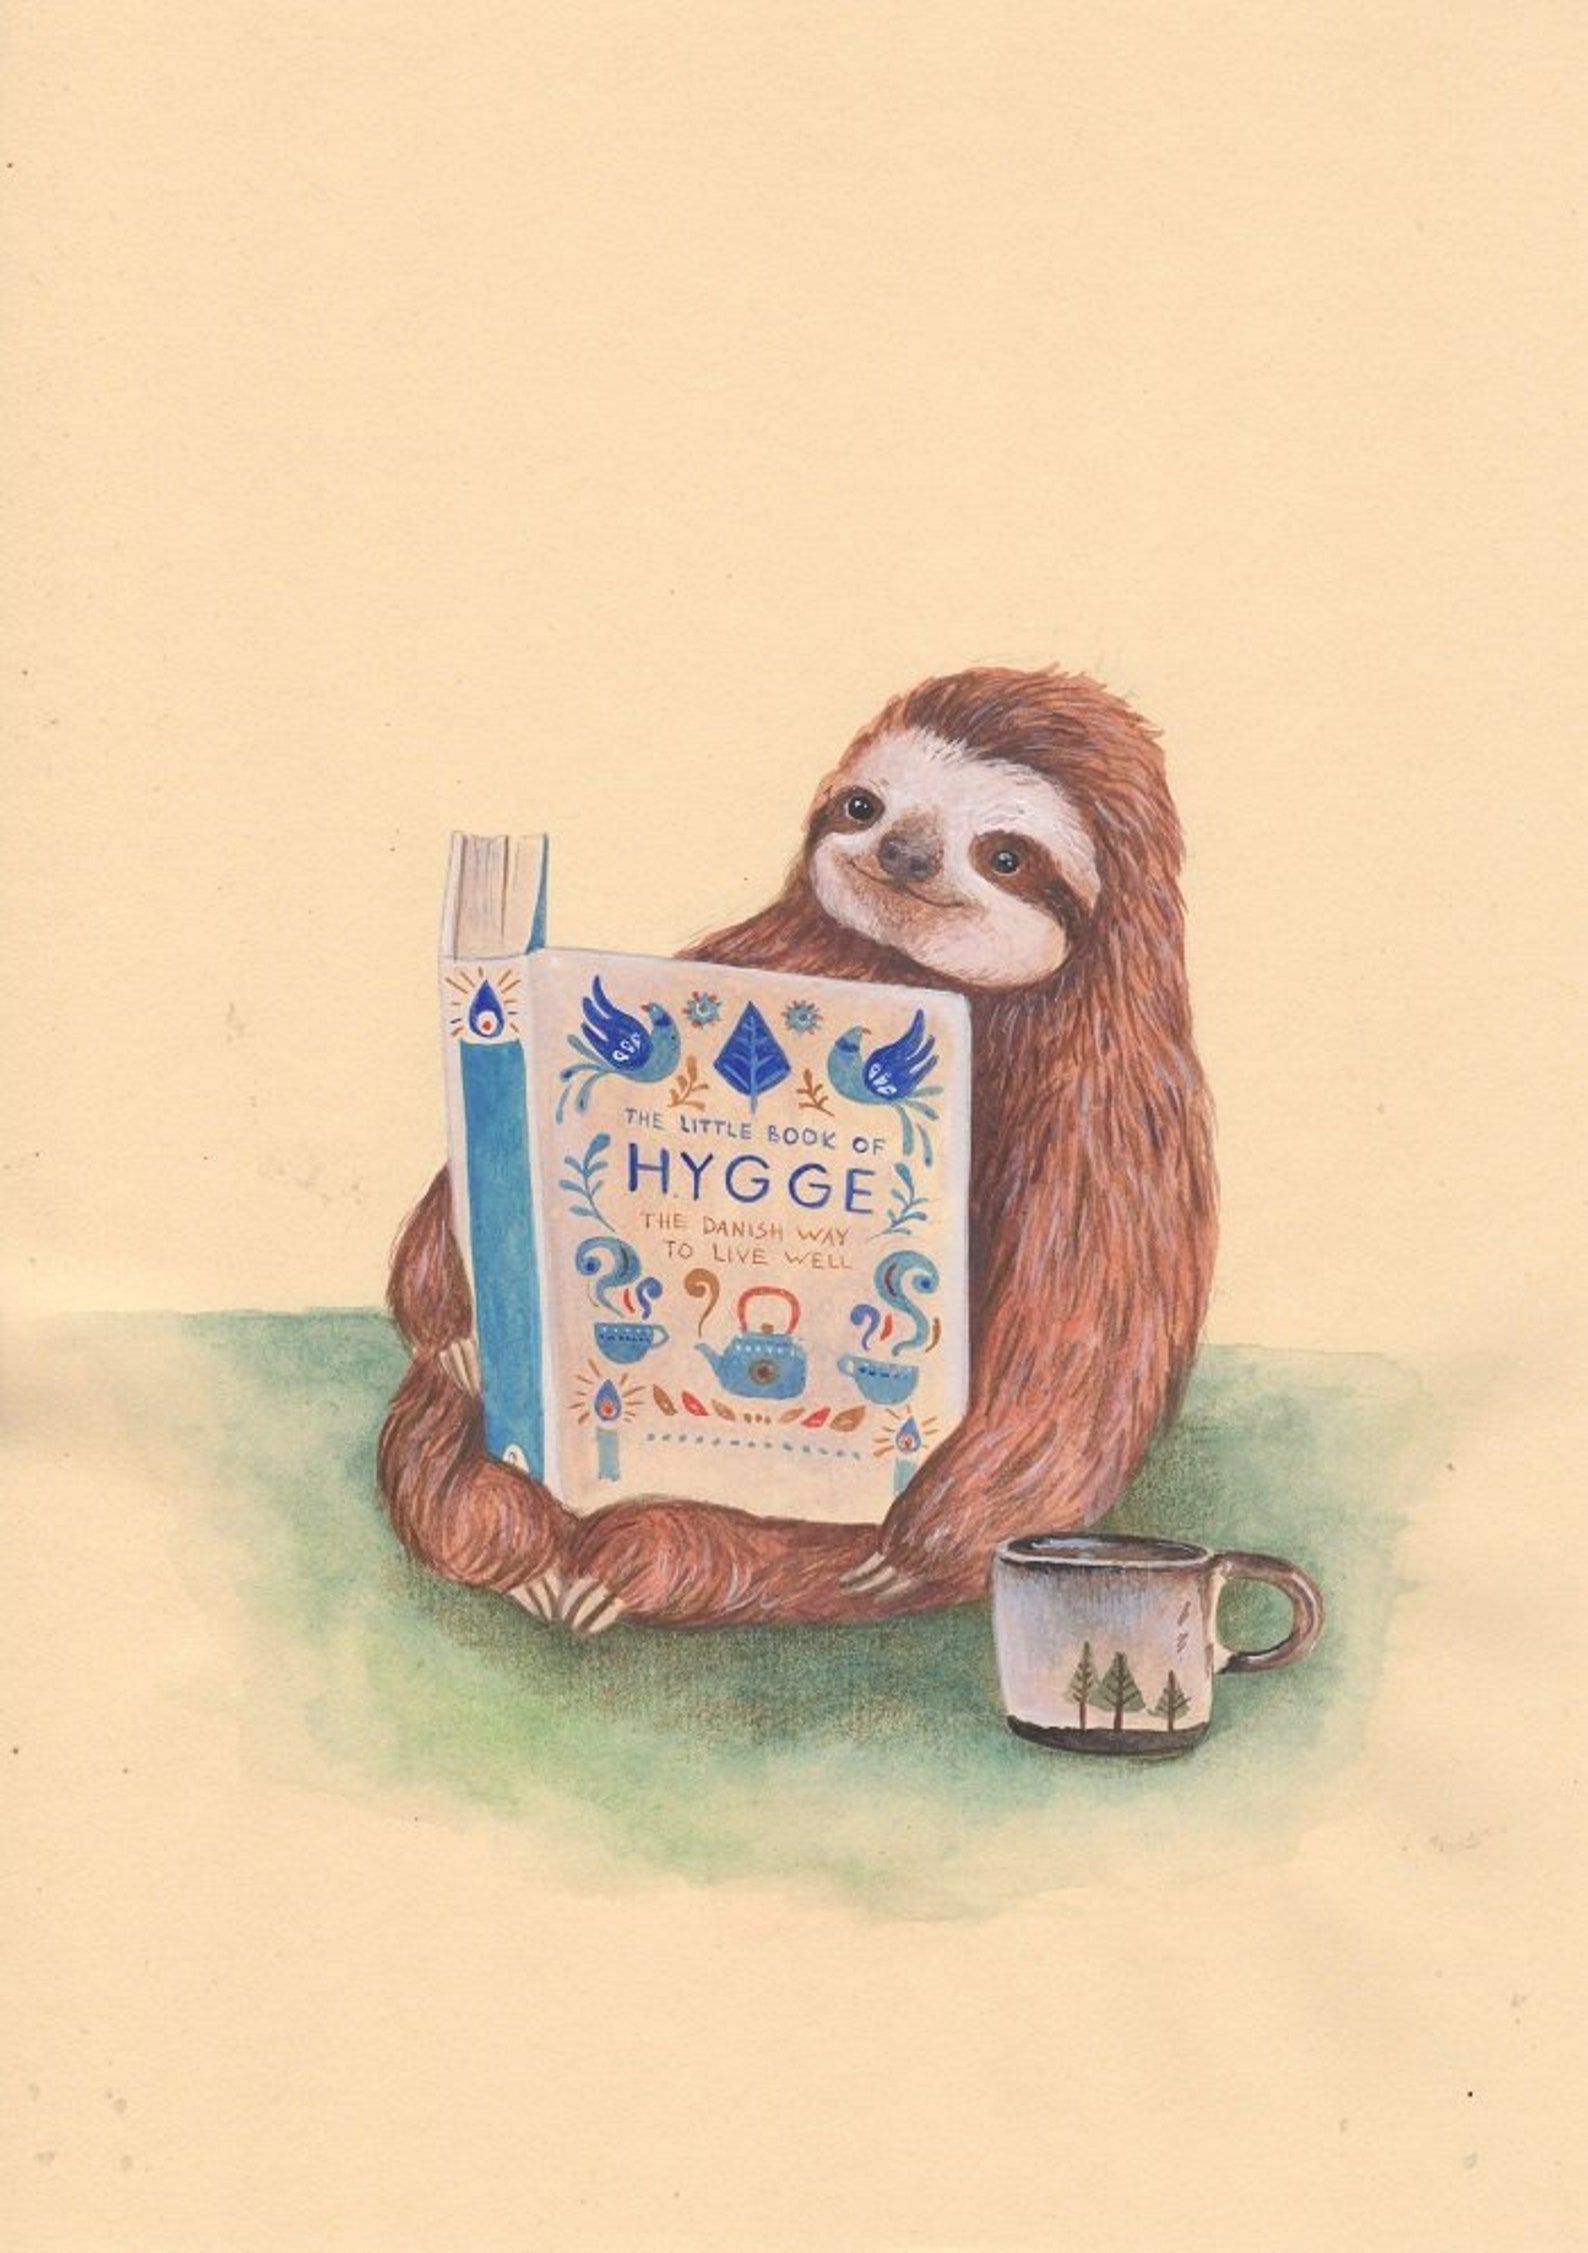 Image of a print that features a sloth with a mug and a book called "Hygge."